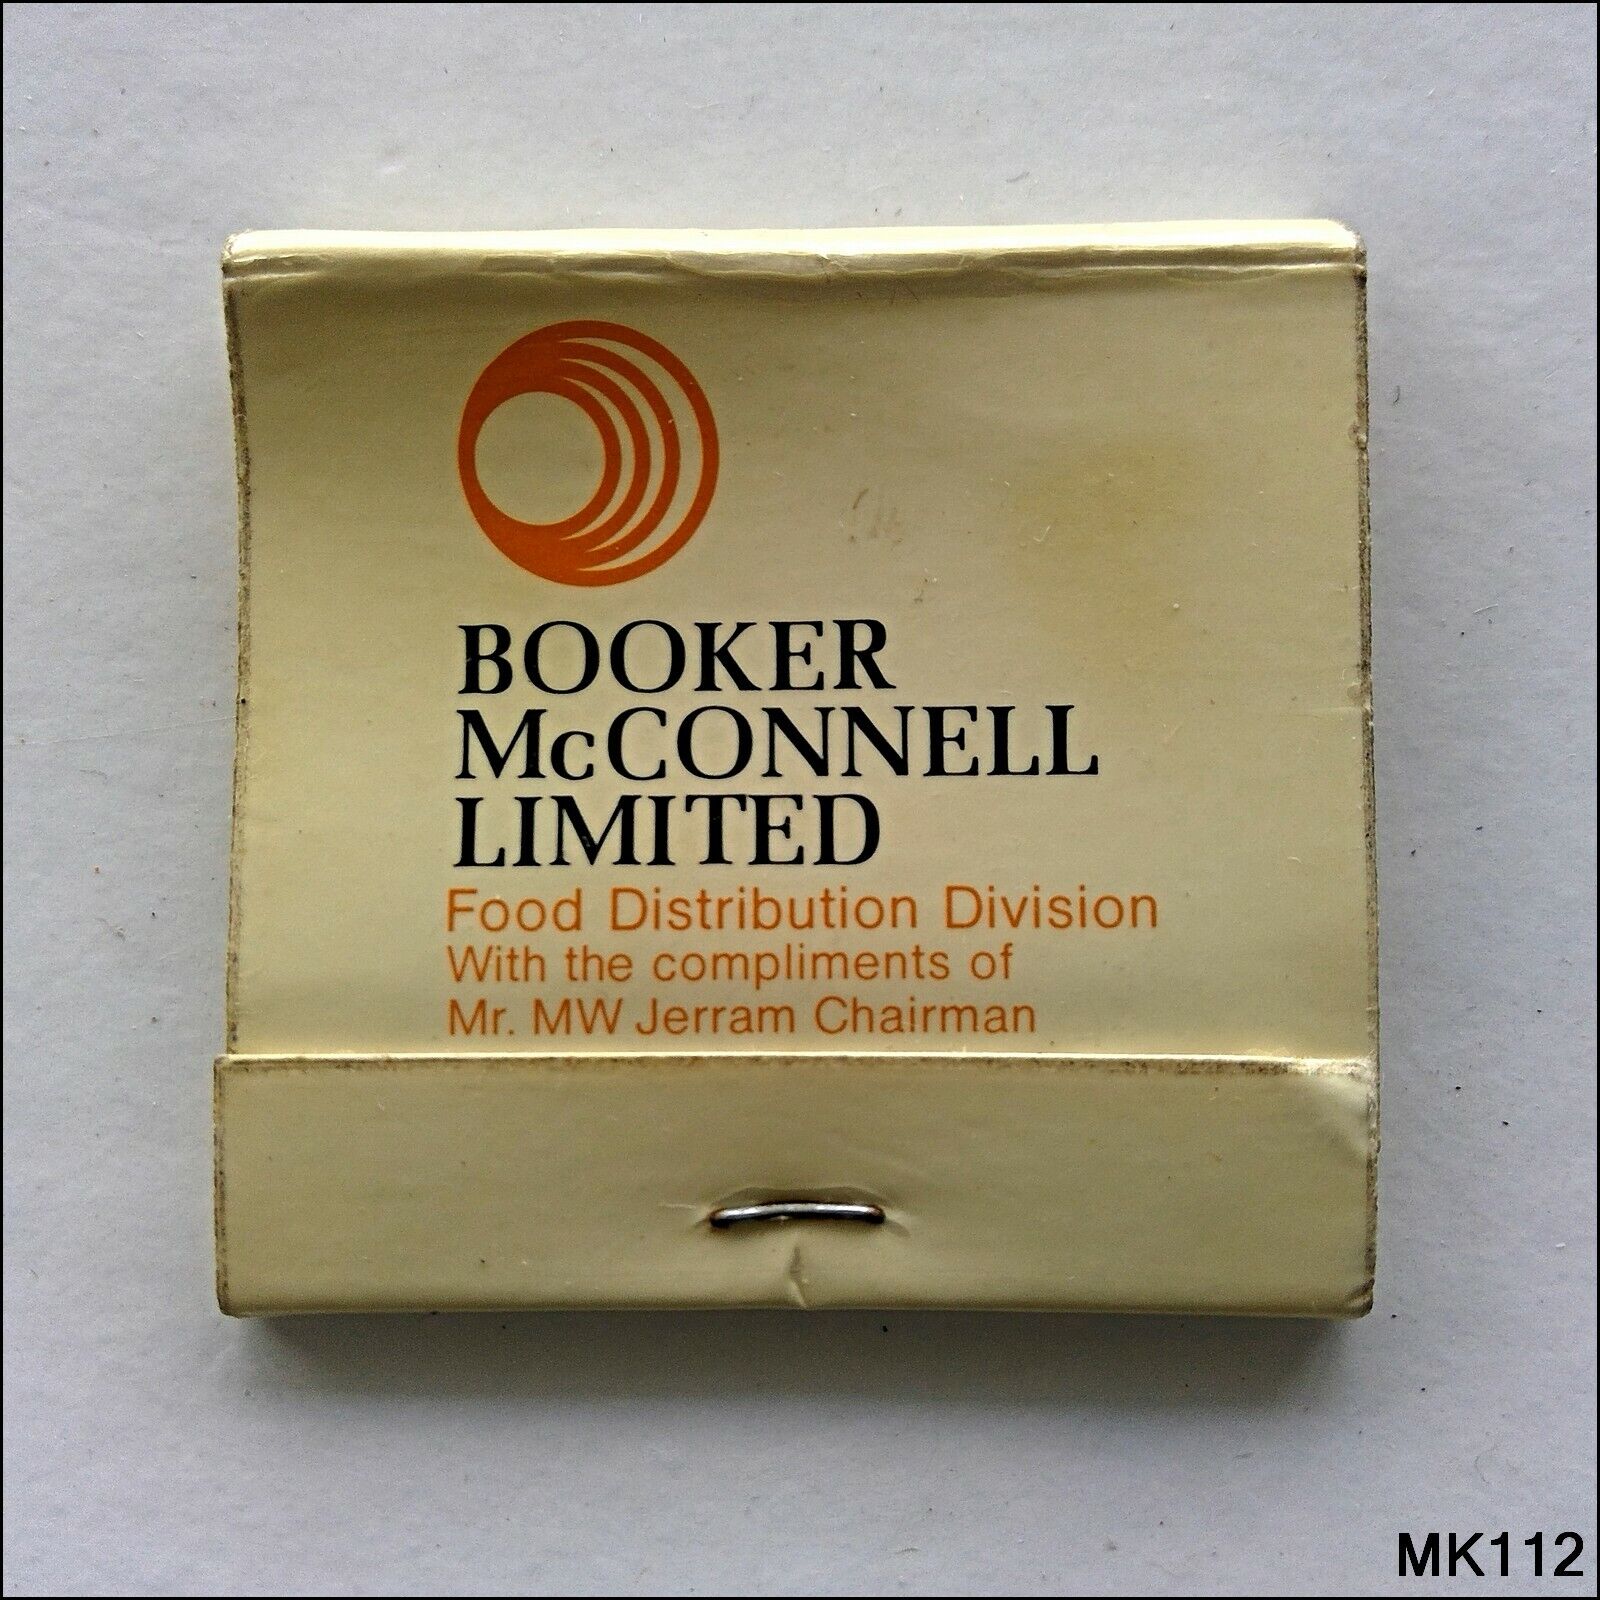 Booker McConnell Limited Food Distribution Division Middlesex Matchbook (MK112)